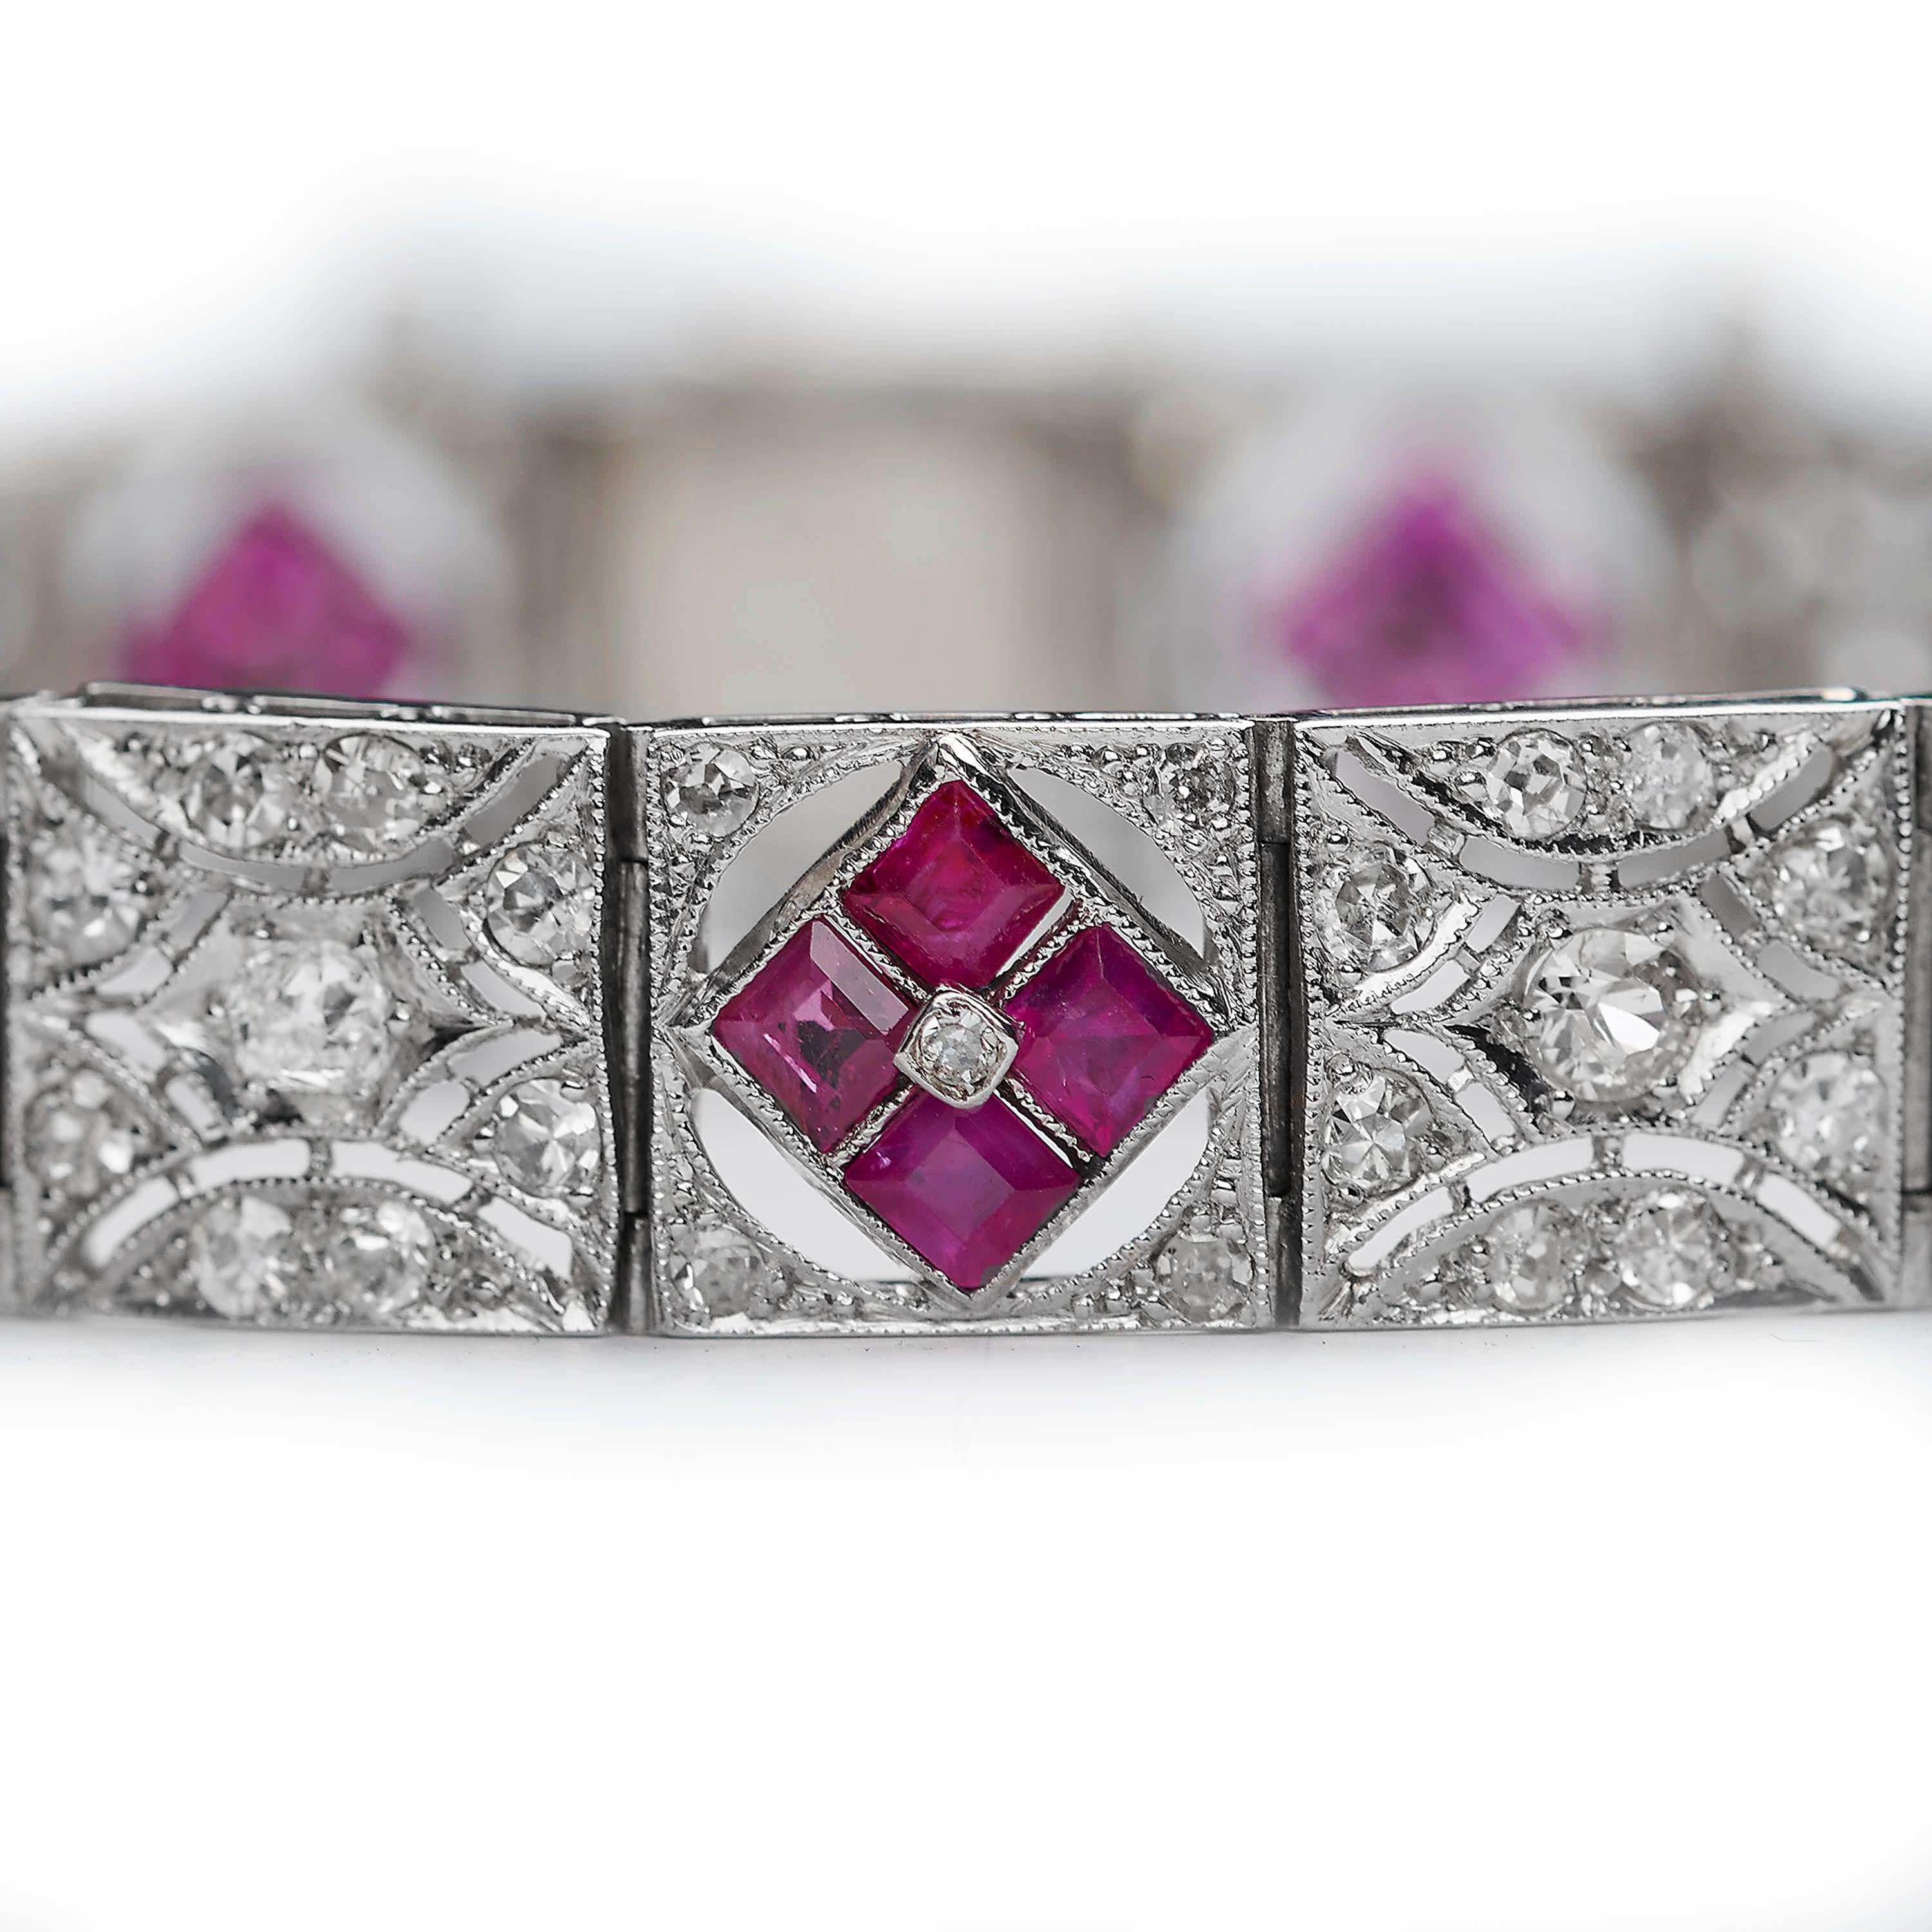 An Art Deco ruby and diamond bracelet, with alternating square plaques set with groups of four square-cut rubies, in an openwork mount, with old-cut and eight-cut diamonds set in each corner and old-cut diamonds in an openwork mount, with millegrain